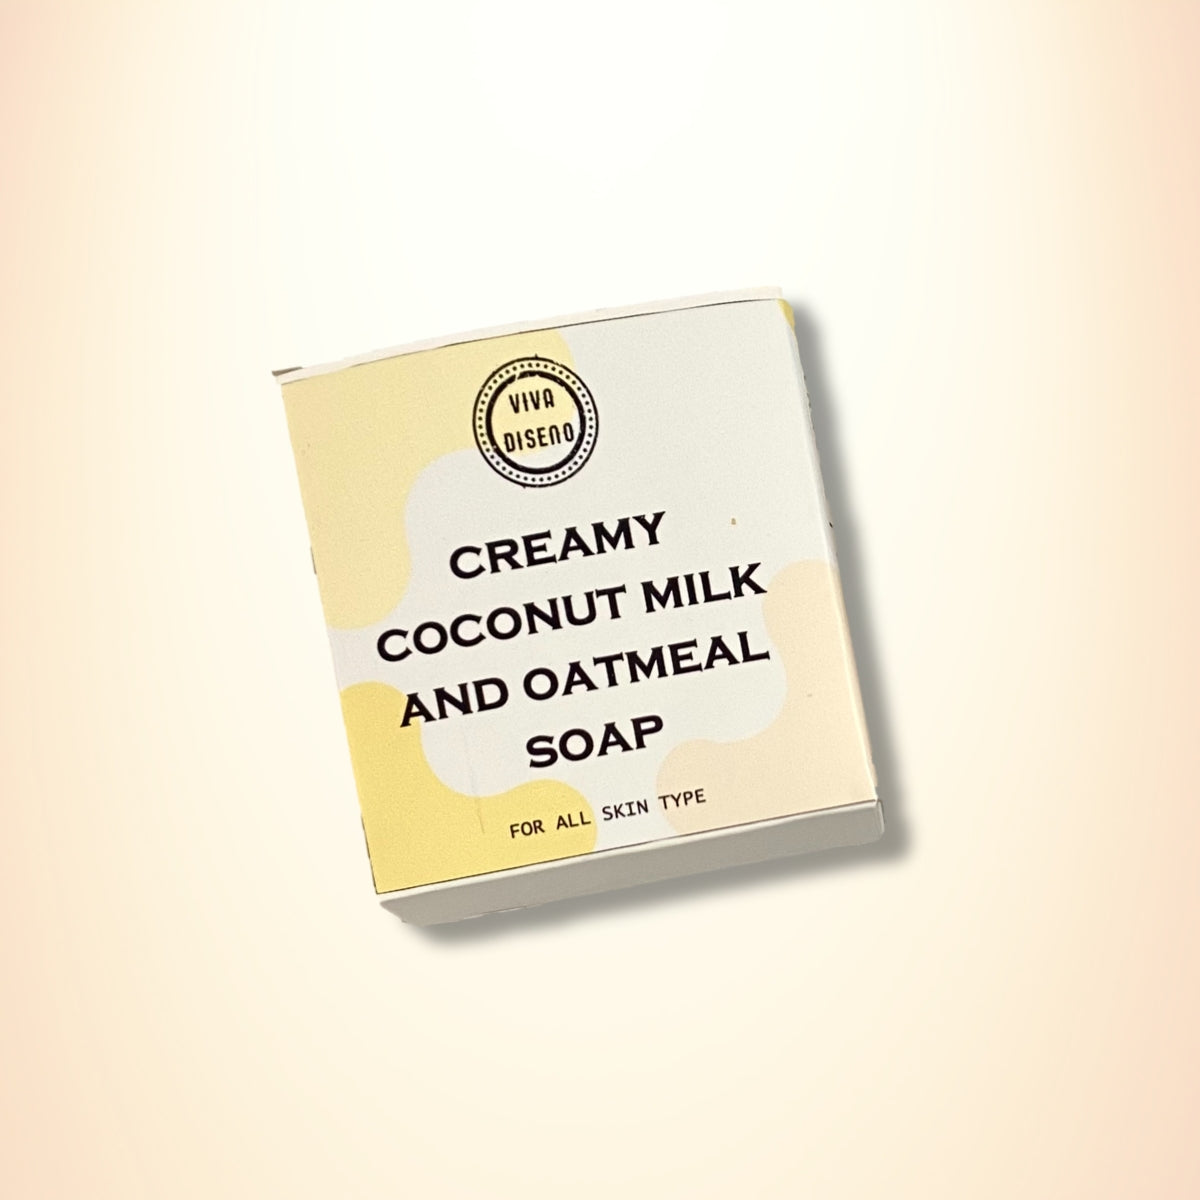 Luxury Creamy Coconut Milk and Oatmeal Soap by Tiarrah: Organic, Non-Toxic - The Luxury Bath and Body Care Shop